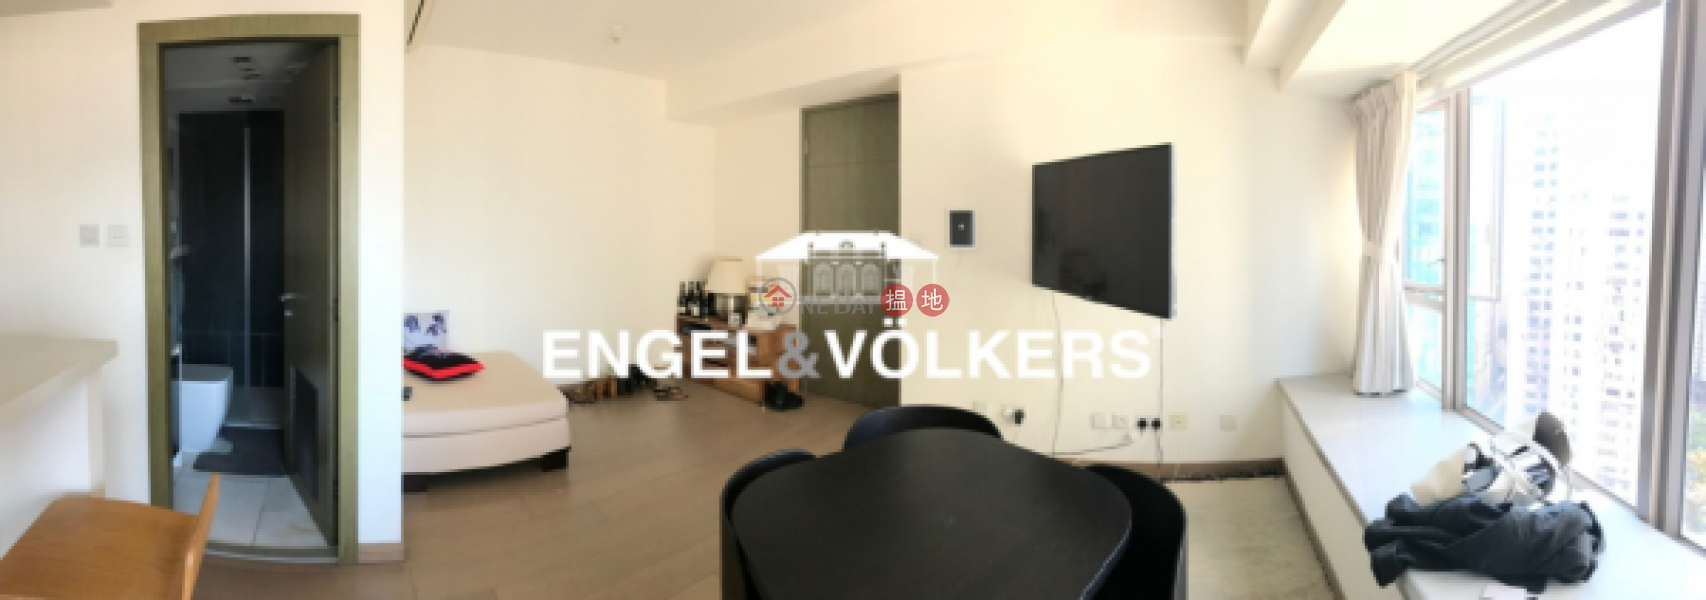 3 Bedroom Family Flat for Rent in Soho, Centre Point 尚賢居 Rental Listings | Central District (EVHK22903)